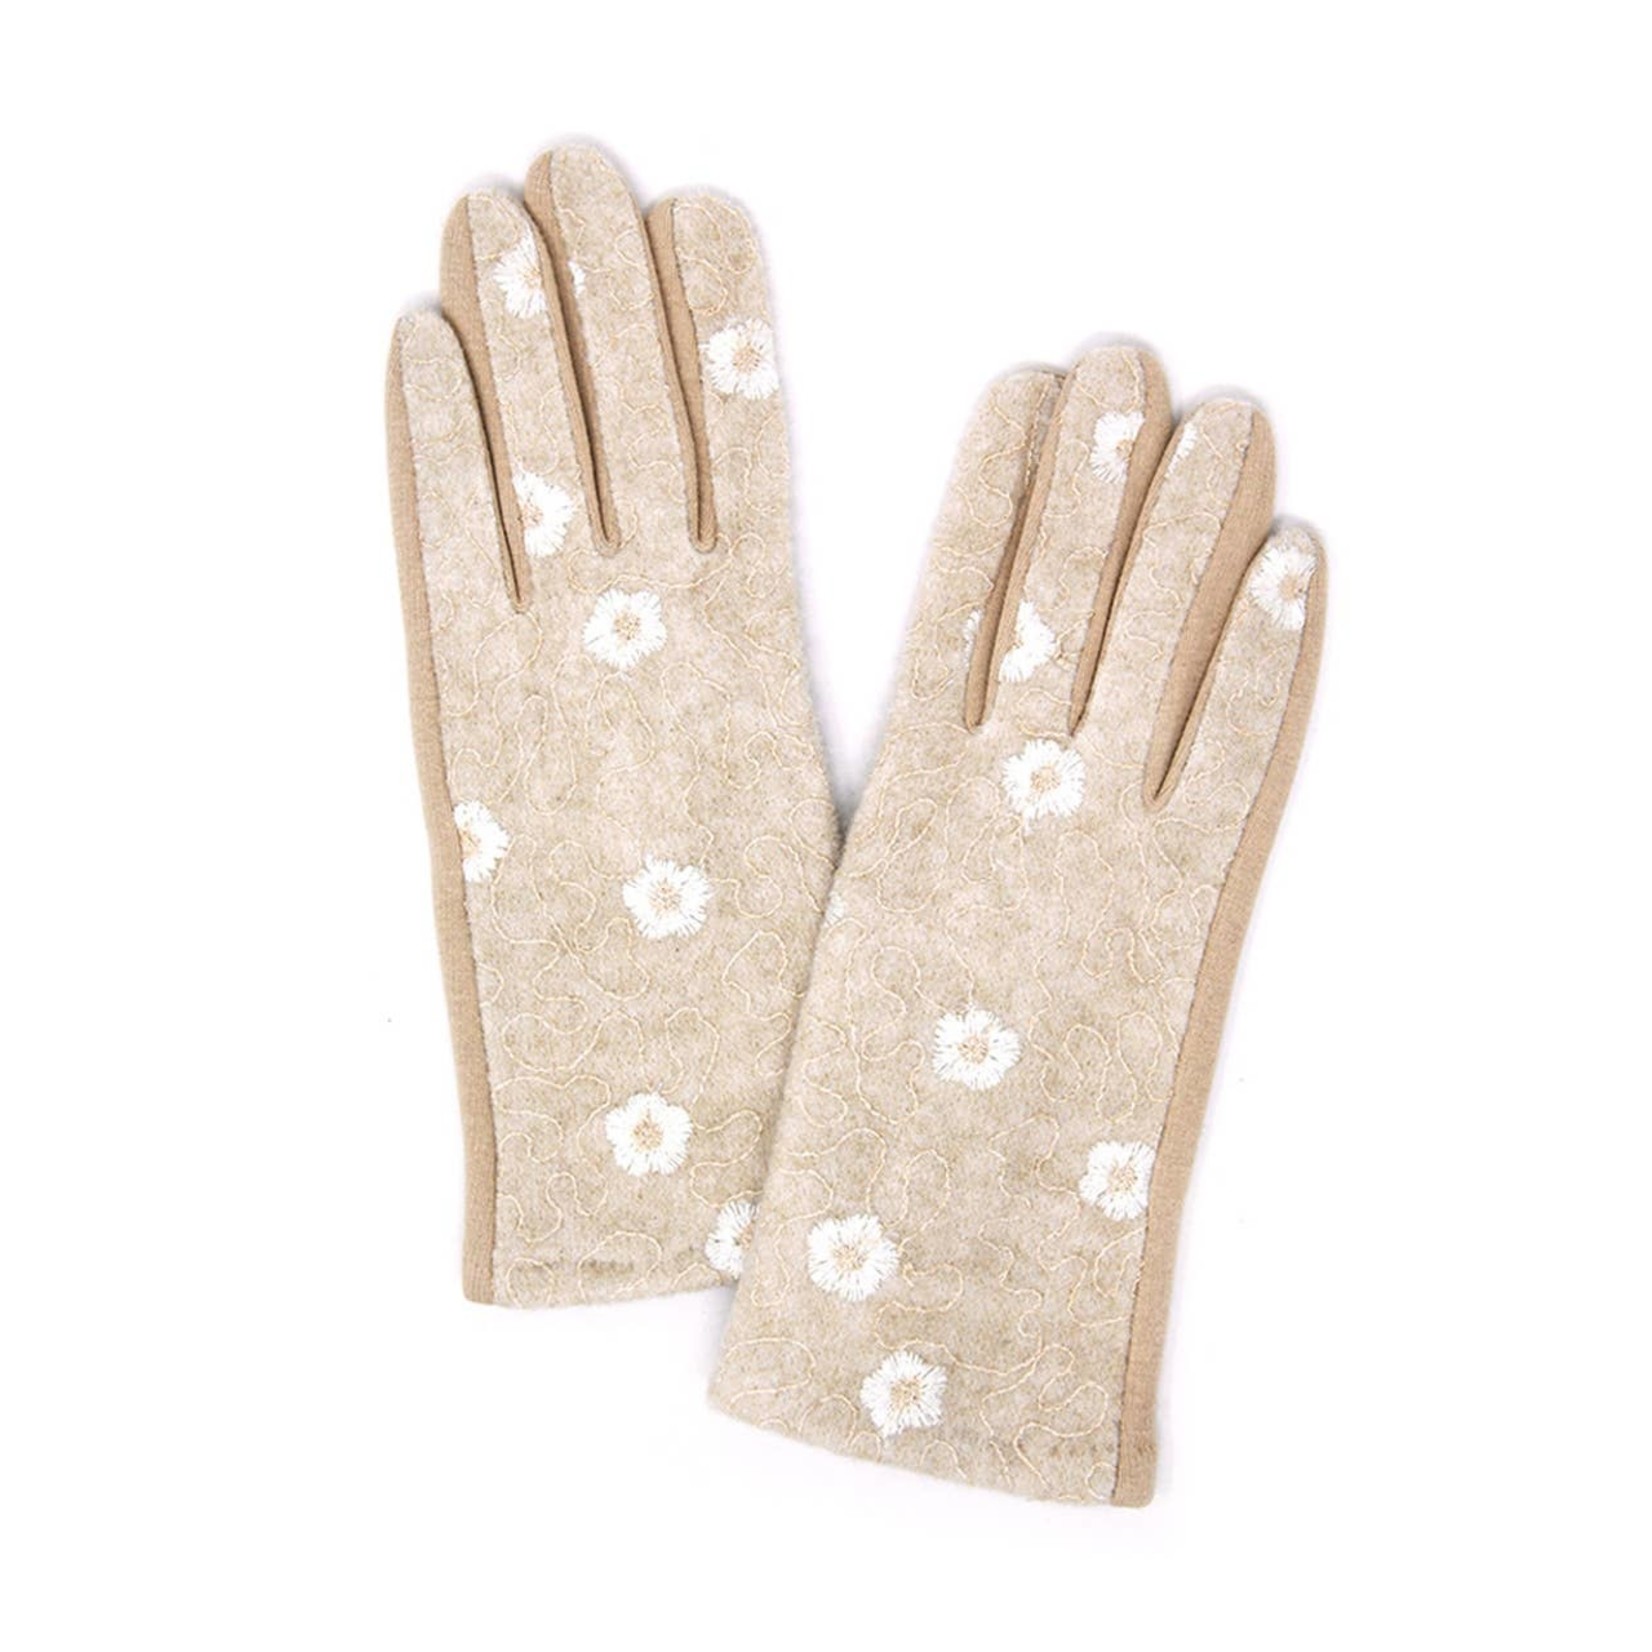 Floral Embroidery Stitched Gloves in Beige